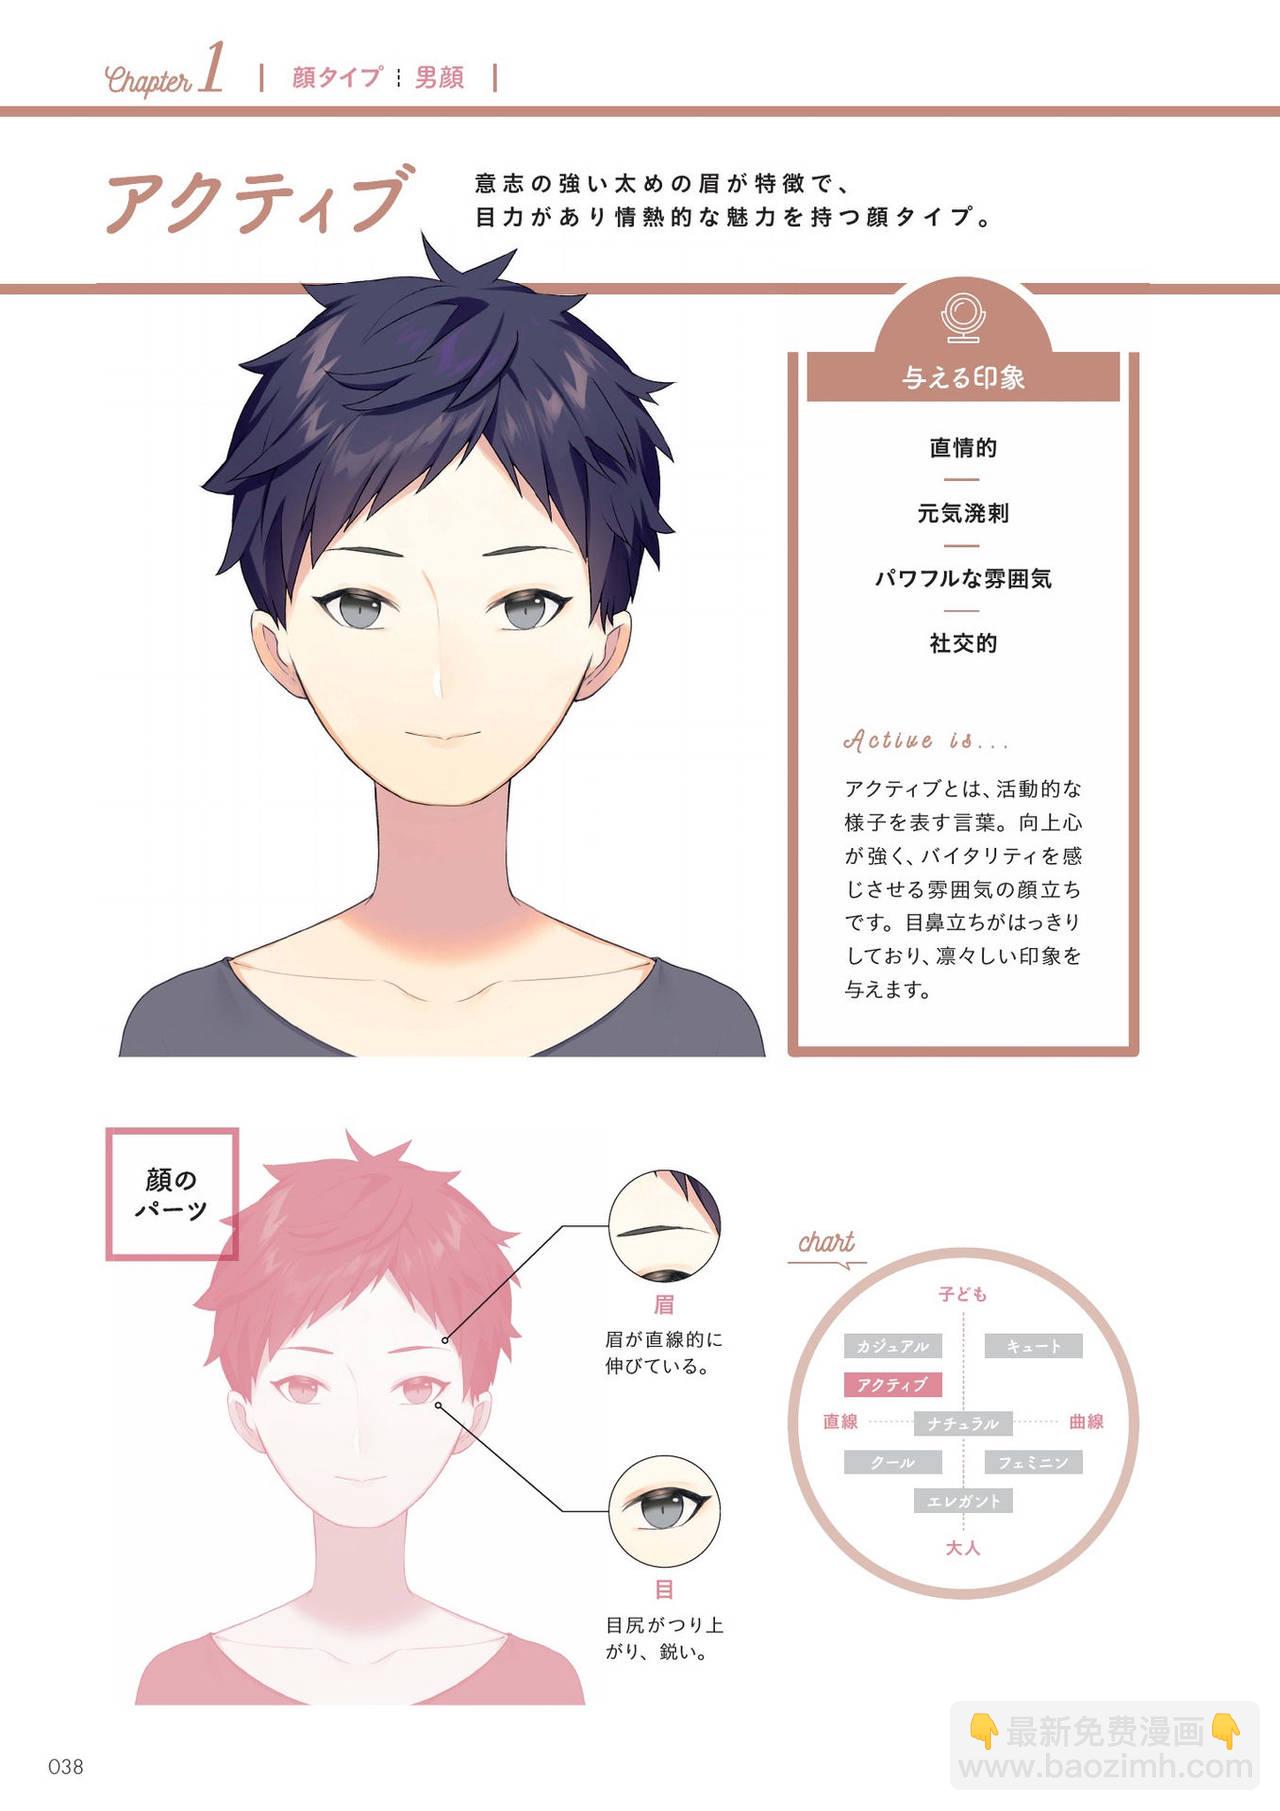 [sogawa]Super drawable series Techniques for drawing female characters with makeup  - 1話(1/4) - 8